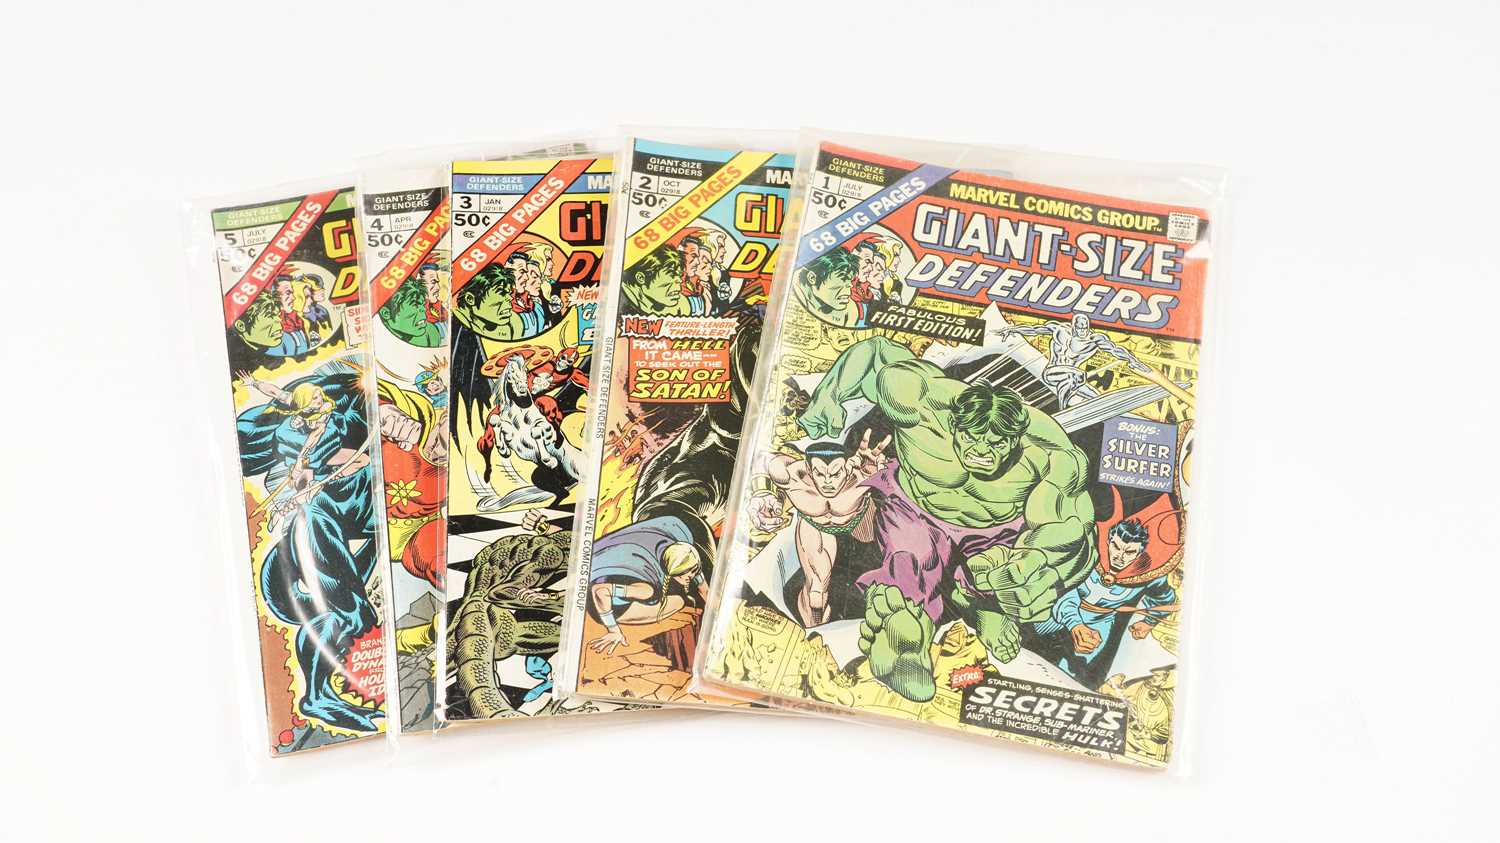 Marvel Giant-Size issues